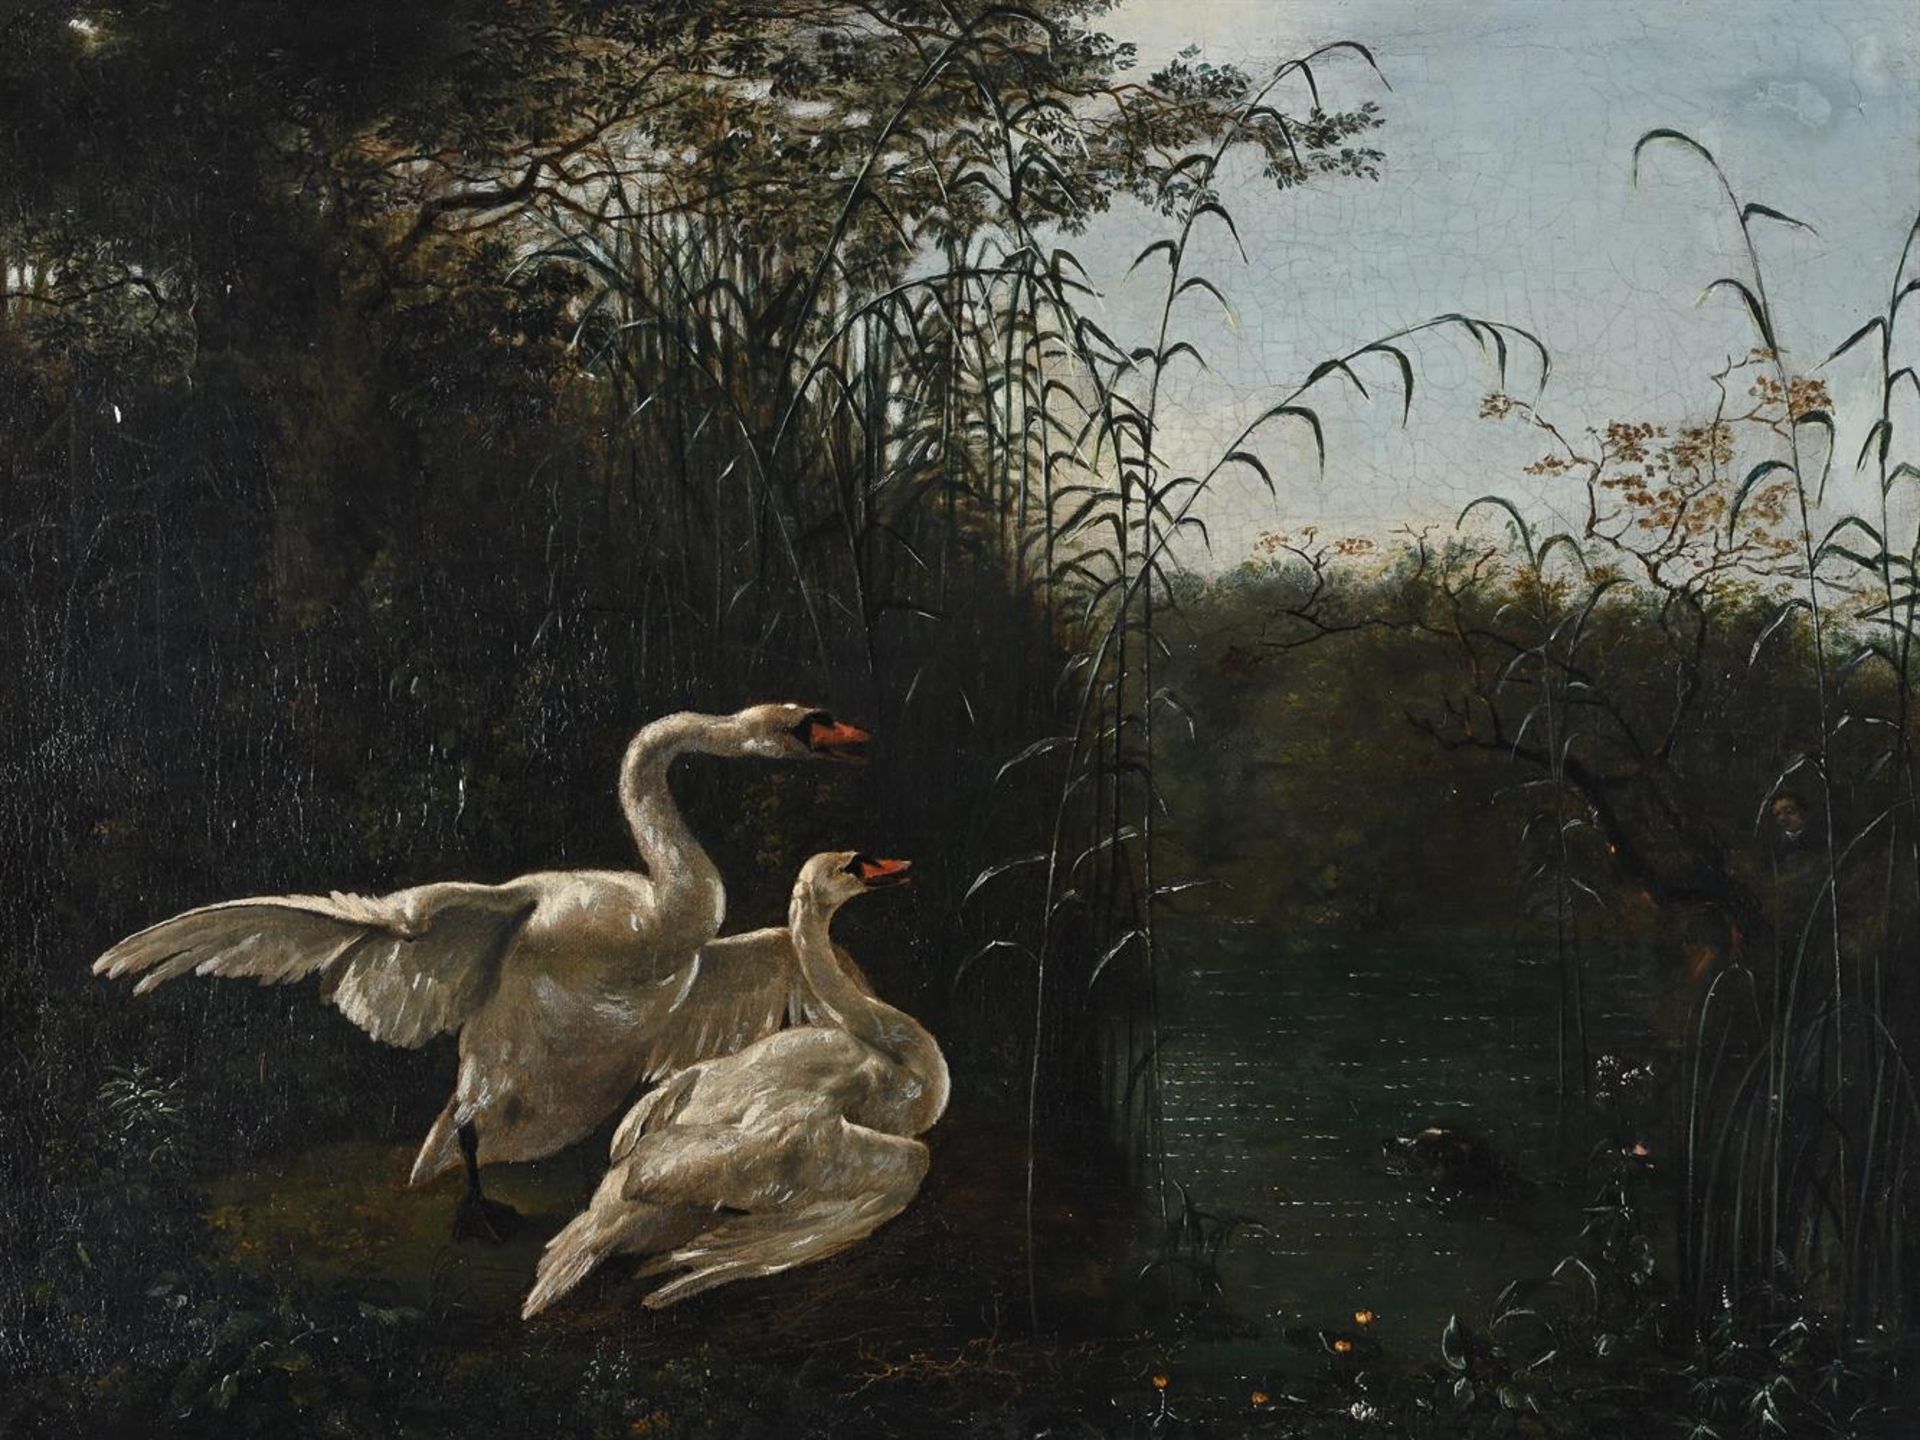 FOLLOWER OF JAN WEENIX, TWO SWANS DISTURBED BY A DOG